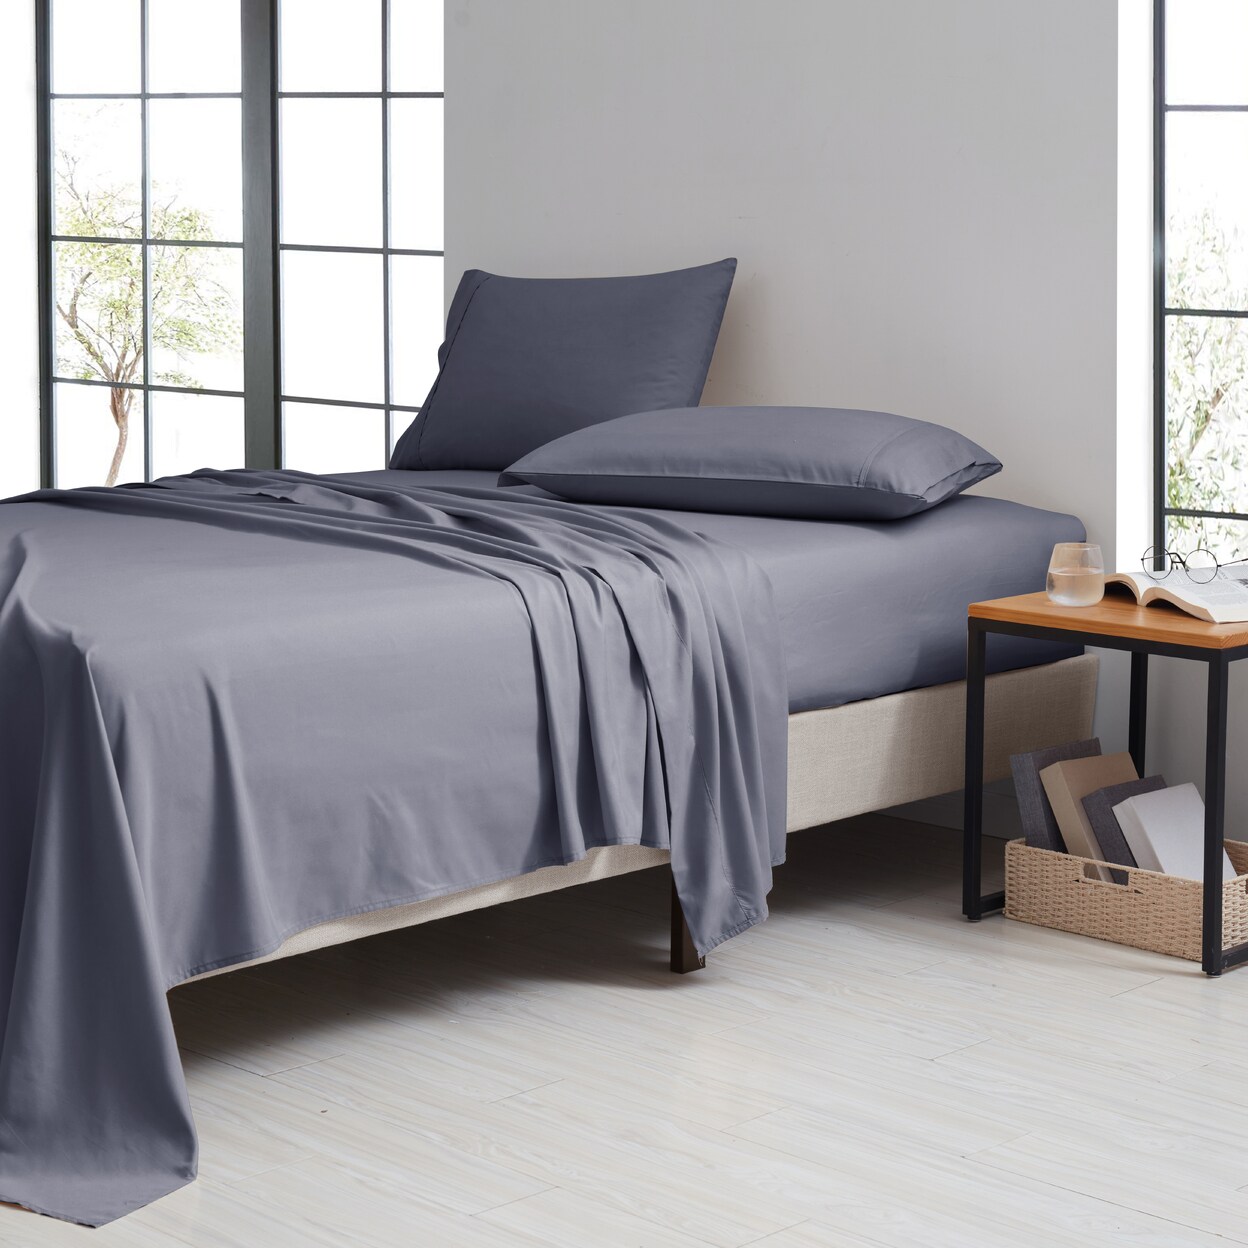 Bamboo Comfort Bamboo 1800 Thread Count 4 Piece Luxury Solid Sheet Set